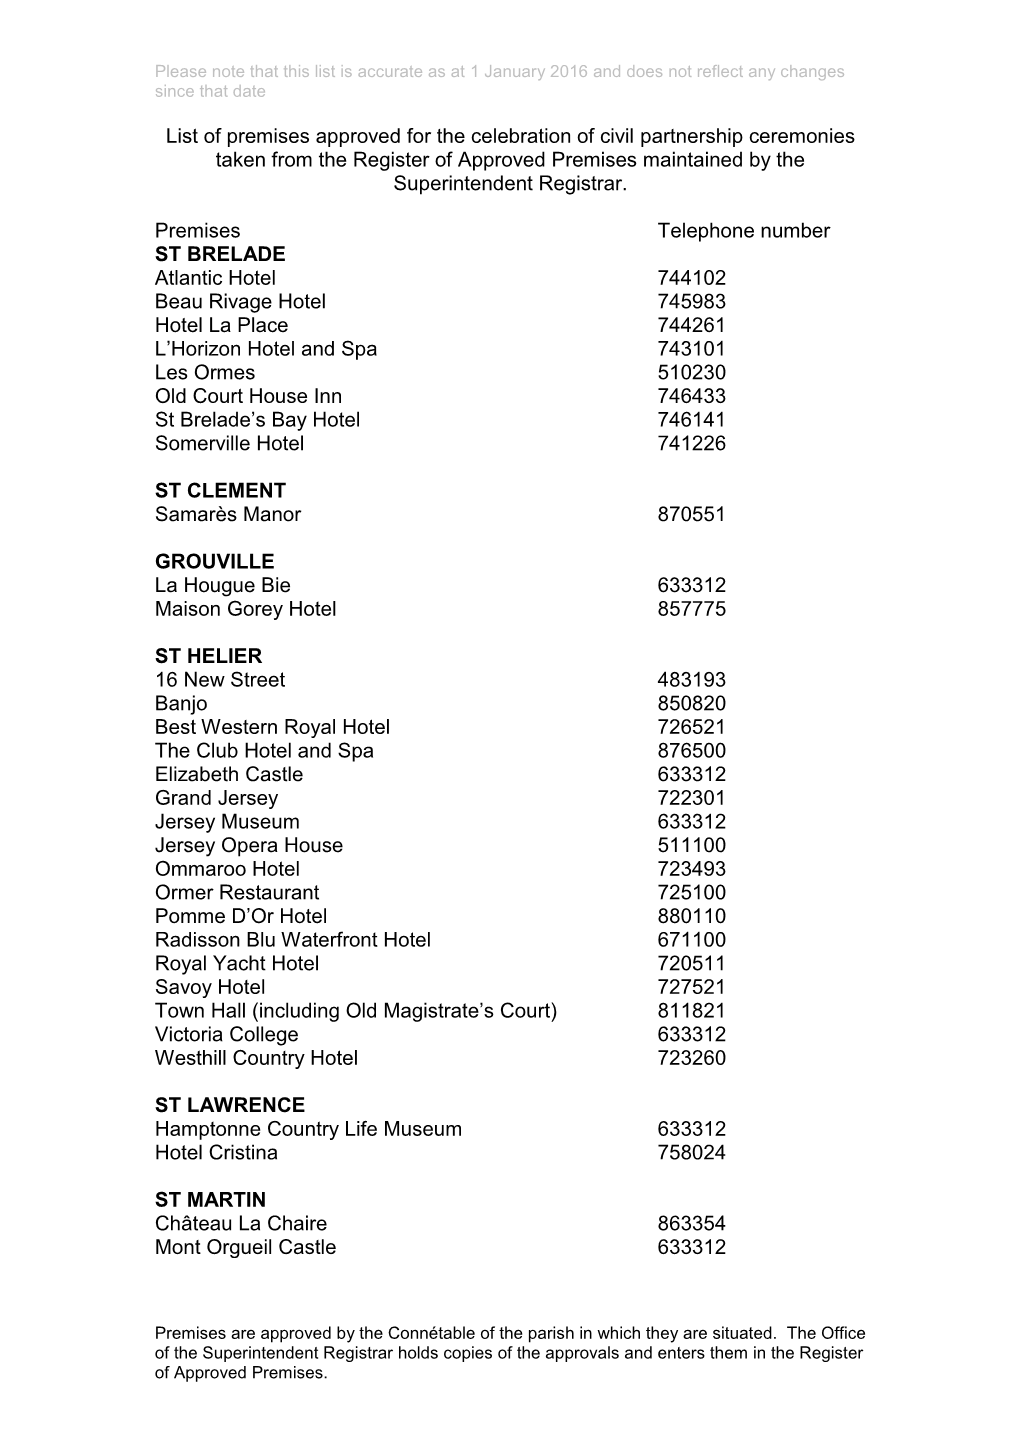 The Superintendent Registrar's List of Approved Venues